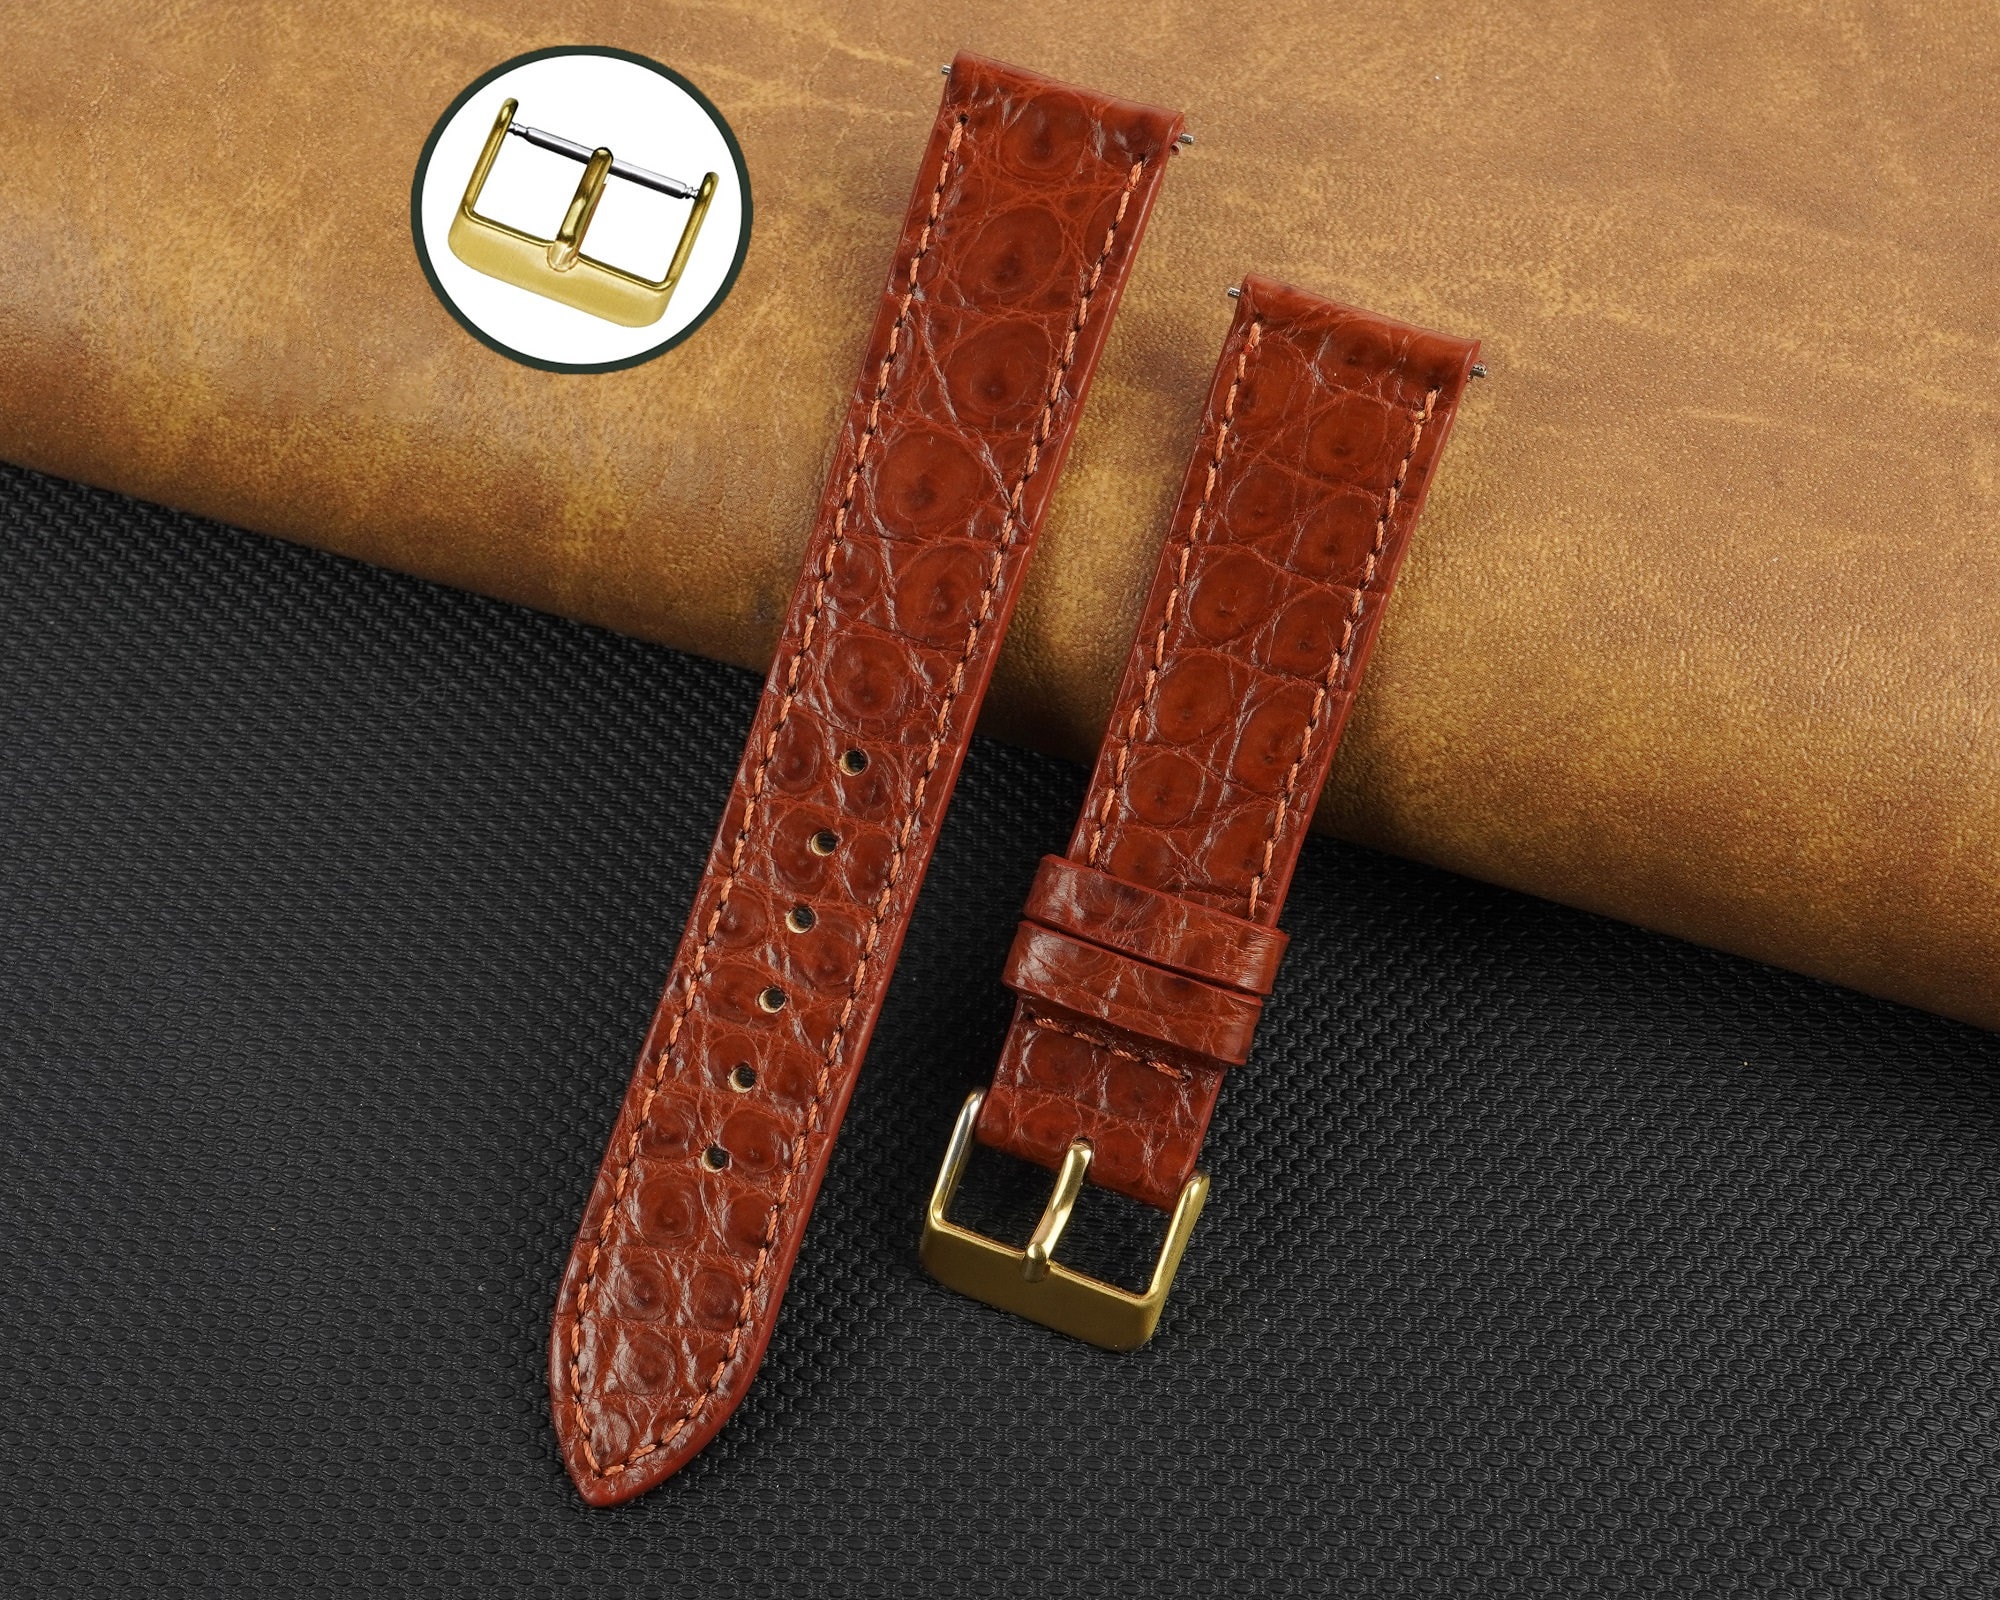 20mm Brown Genuine Leather Watchband | Stylish, Center Padded Replacement  Watchstrap that brings New Life to Any Watch (Mens Standard Length)